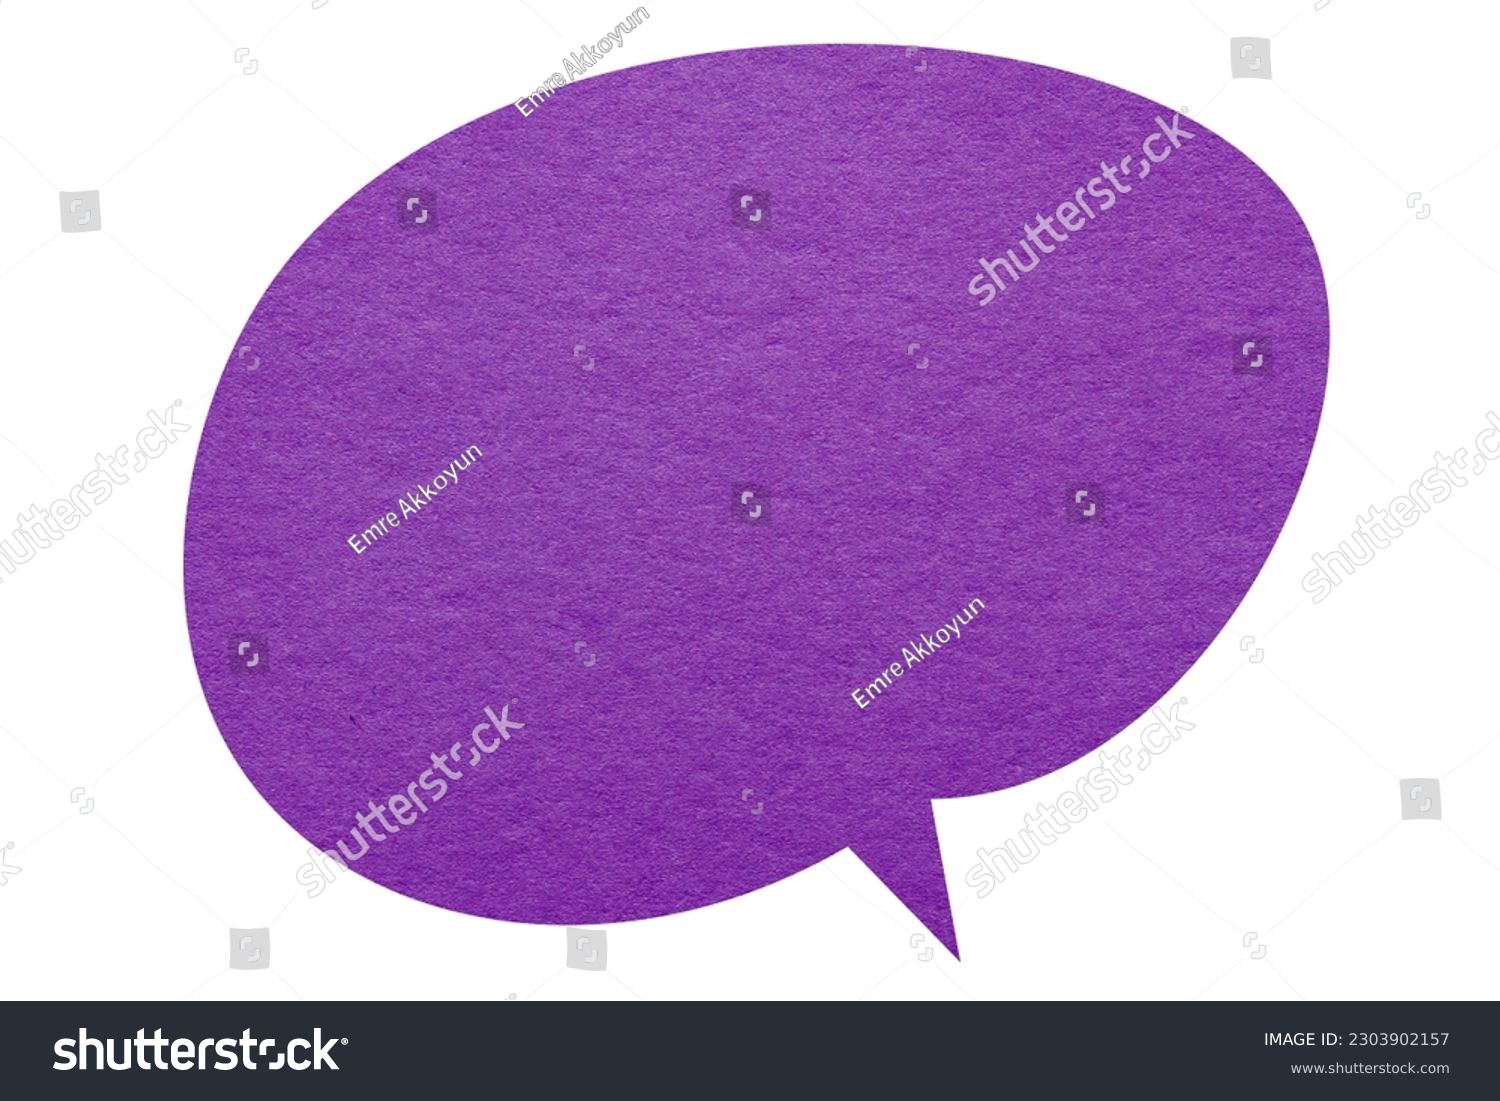 Purple paper speech bubble isolated on a white background. Blank chat bubble sticker. #2303902157